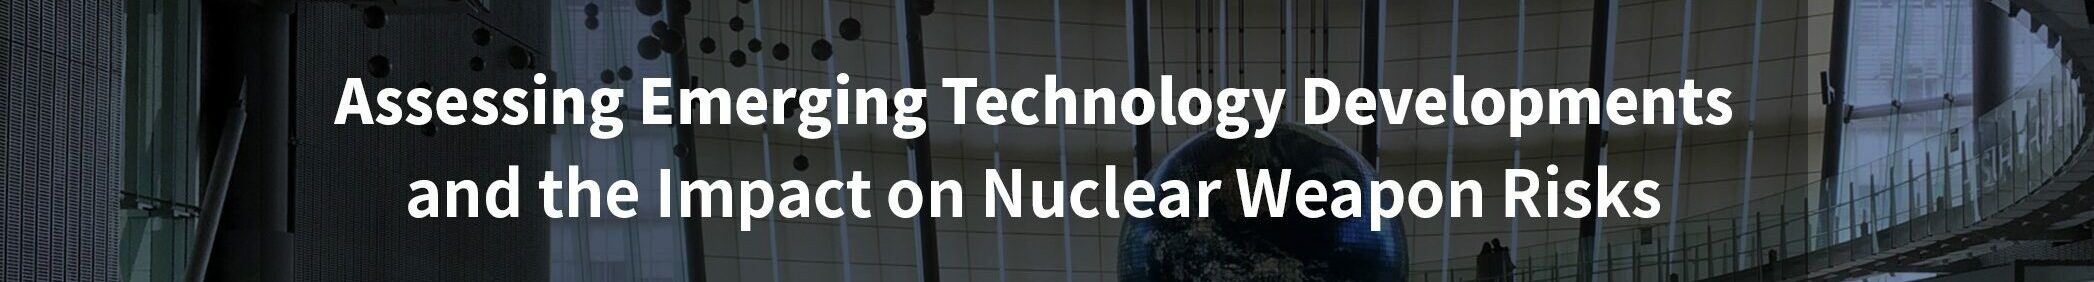 Assessing Emerging Technology Developments and the Impact on Nuclear Weapon Risks